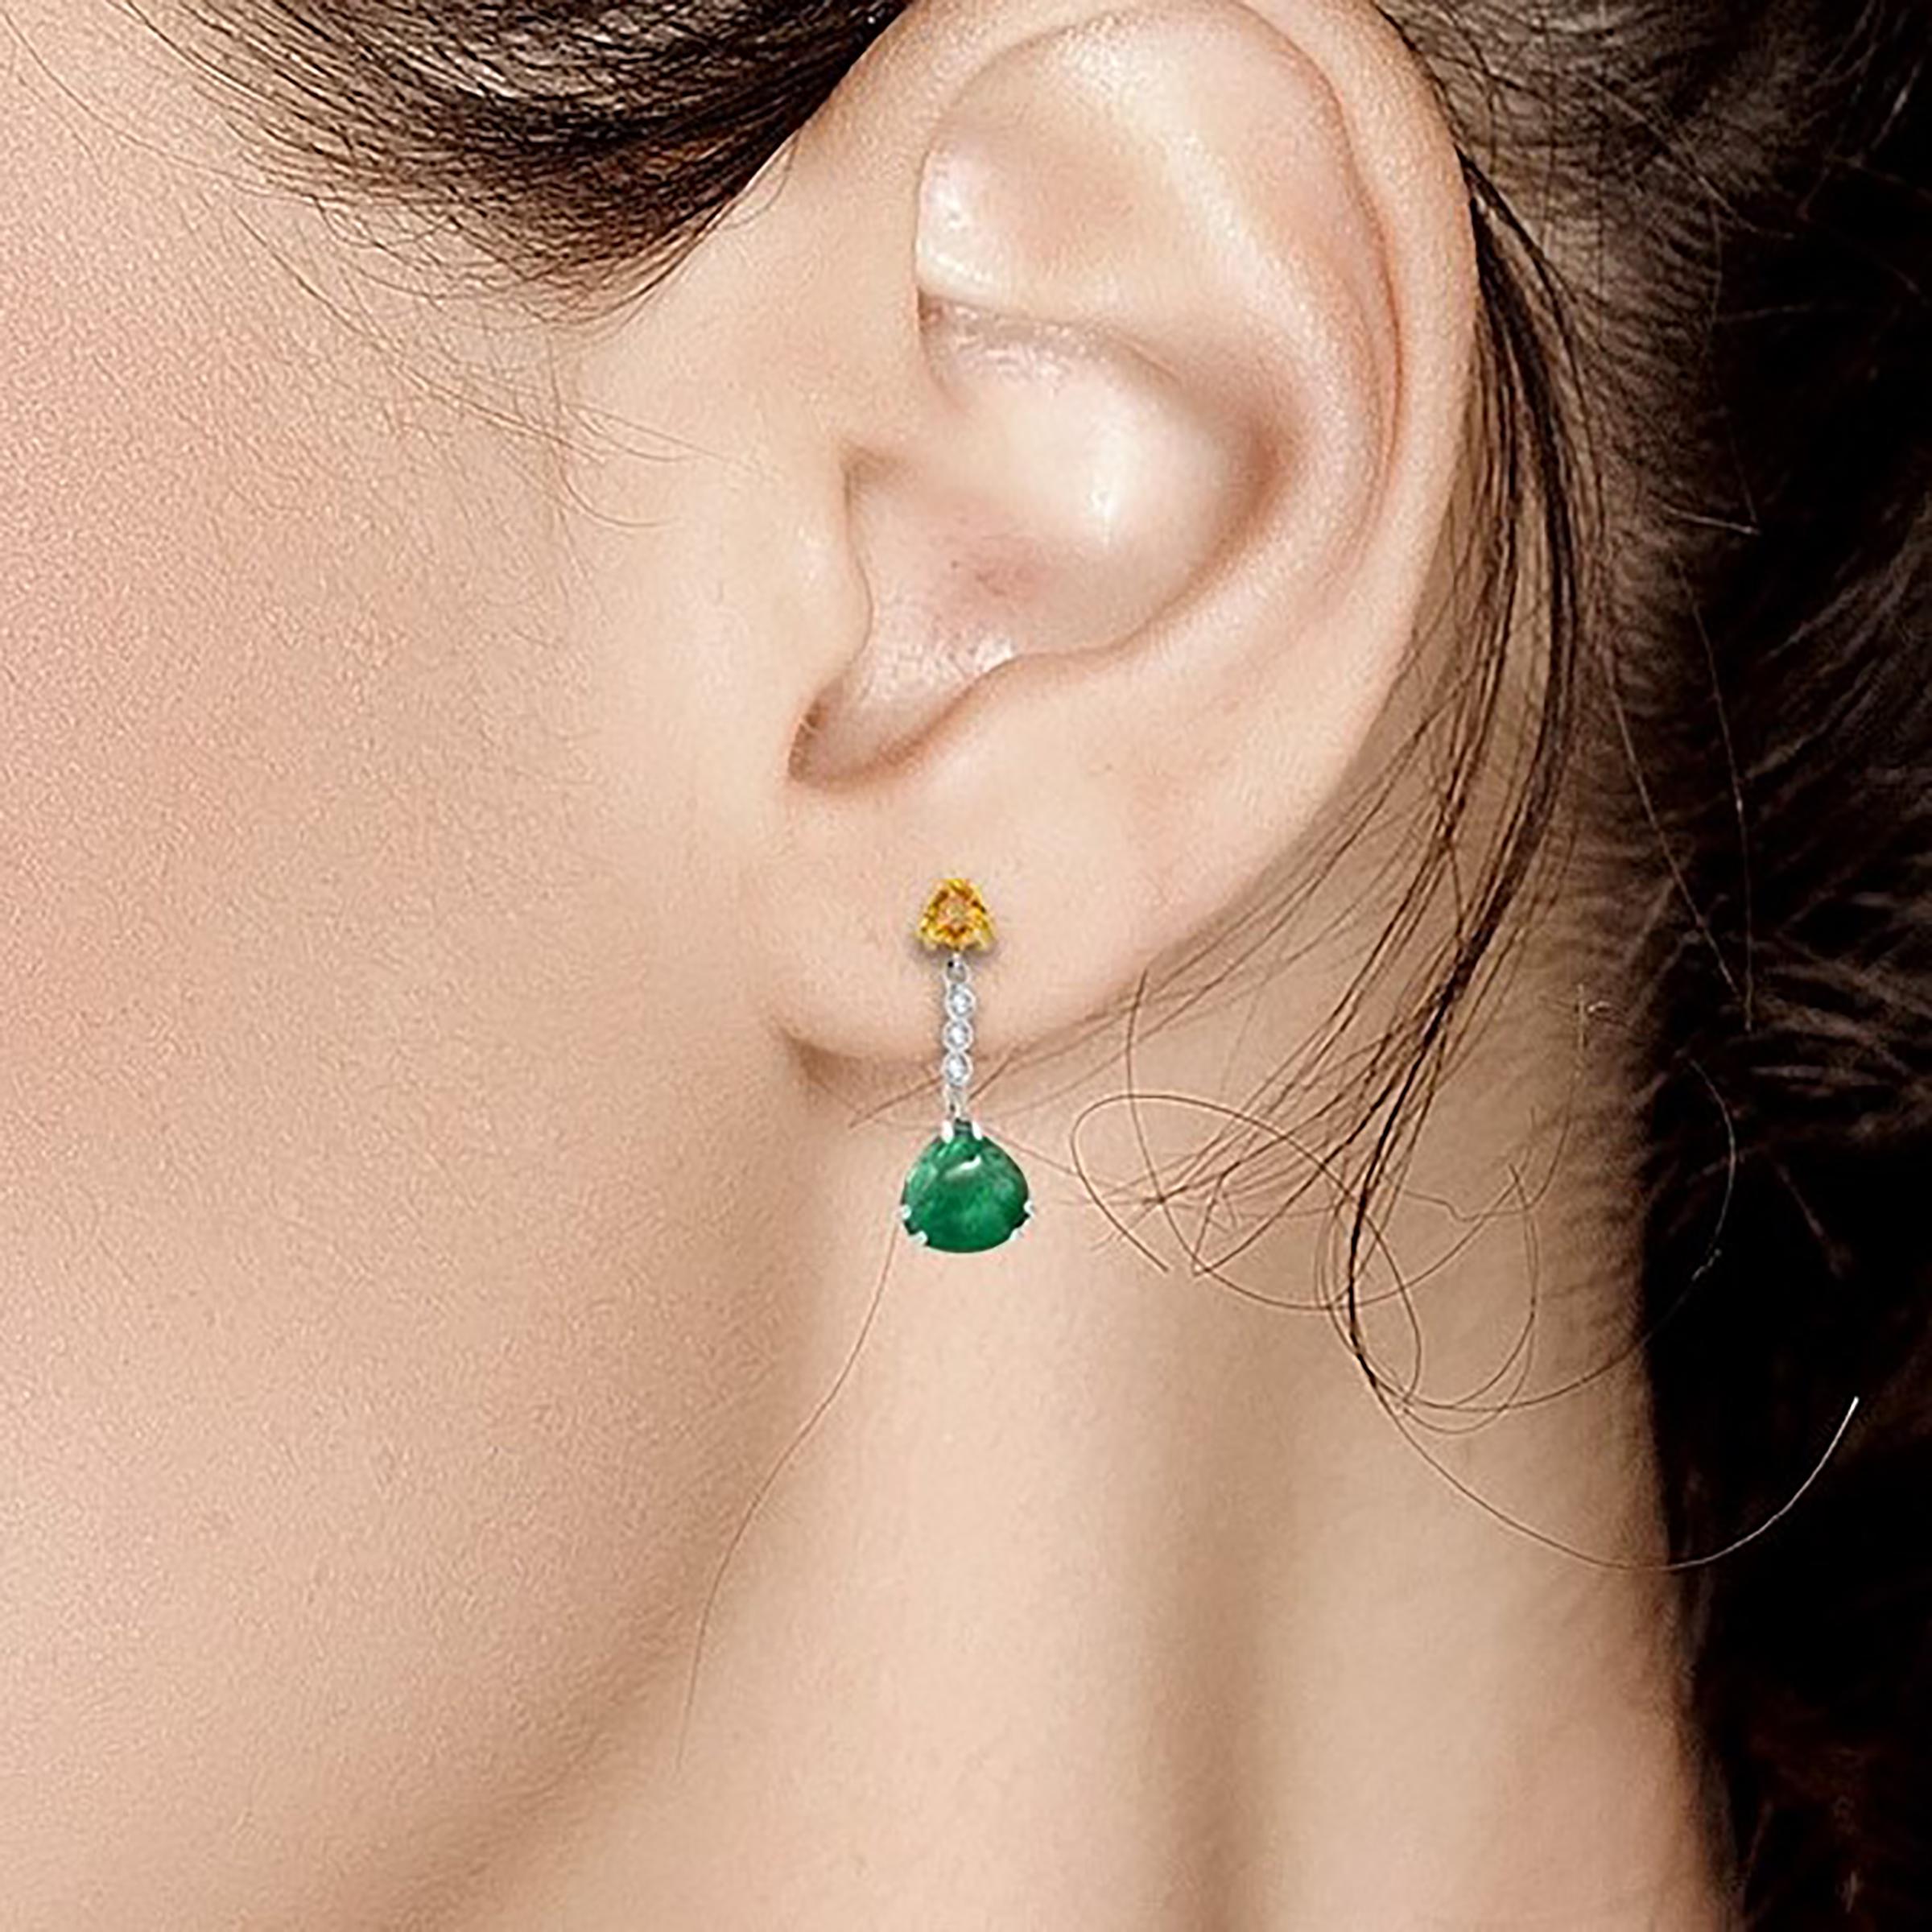 Fourteen karats white and yellow gold drop earrings 
Two triangles shaped cabochon emerald weighing 4.81 carat 
Yellow sapphire weighing 0.85 carat 
Diamonds weighing 0.15 carat
Earrings measuring 1